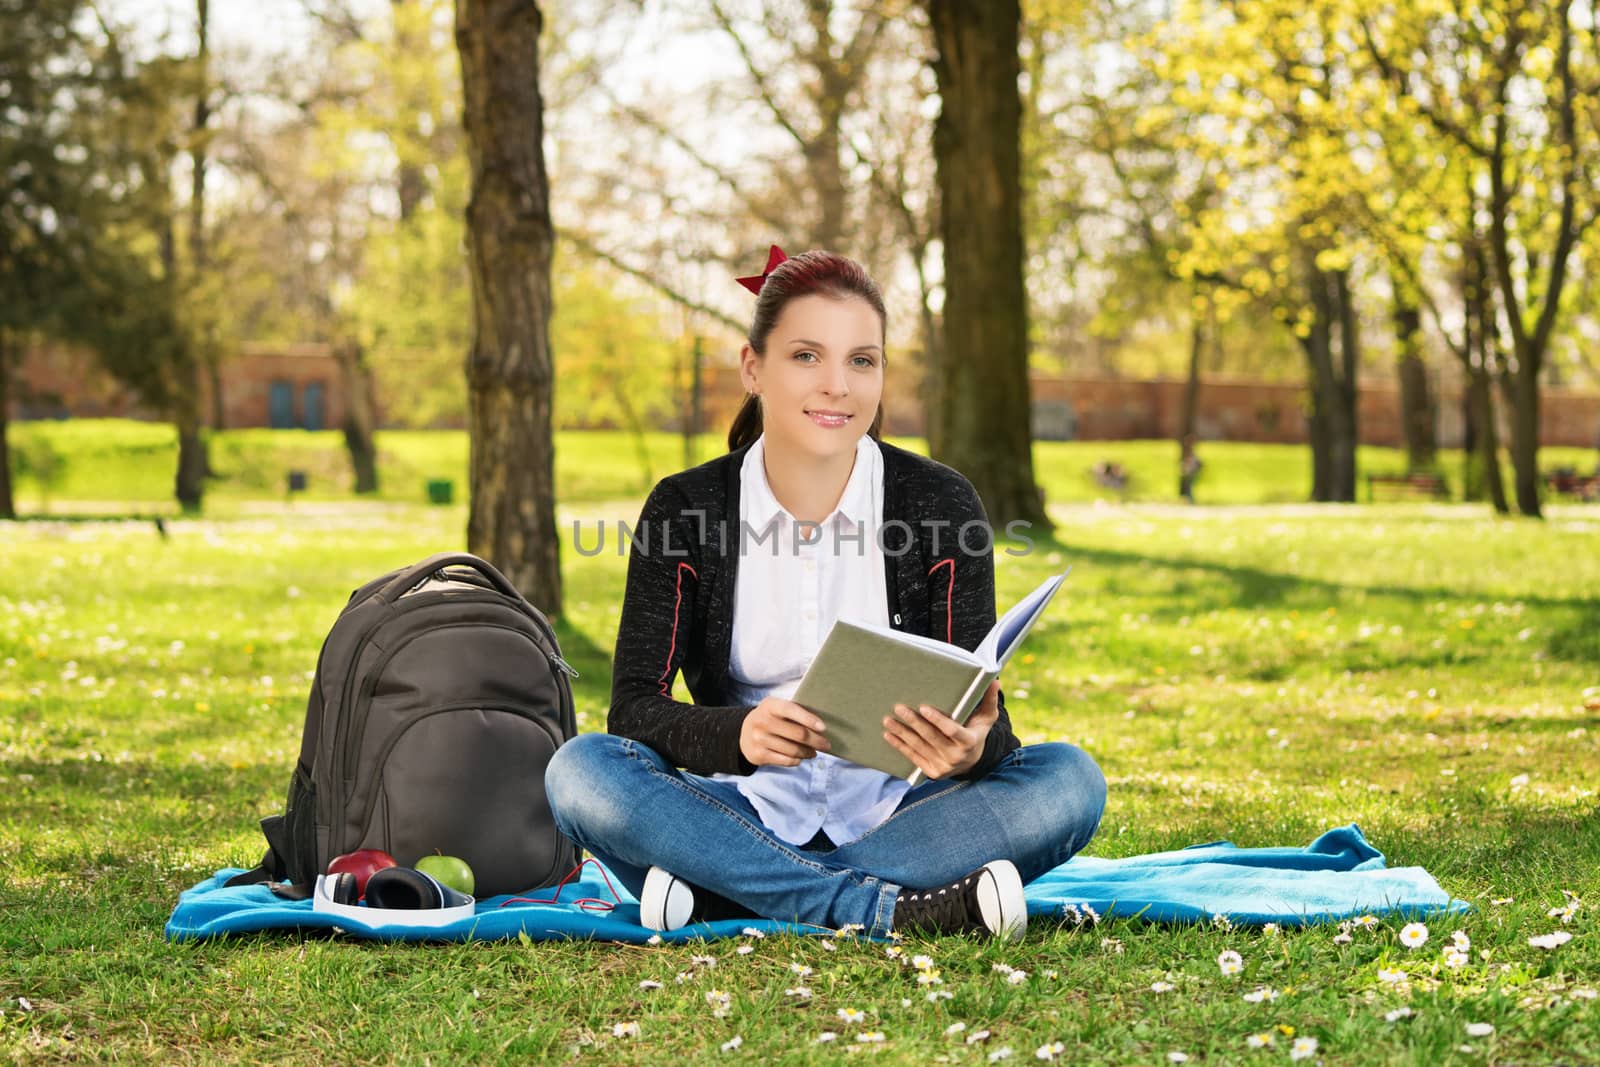 A portrait of a beautiful young female student holding a book, sitting on the grass in a park.